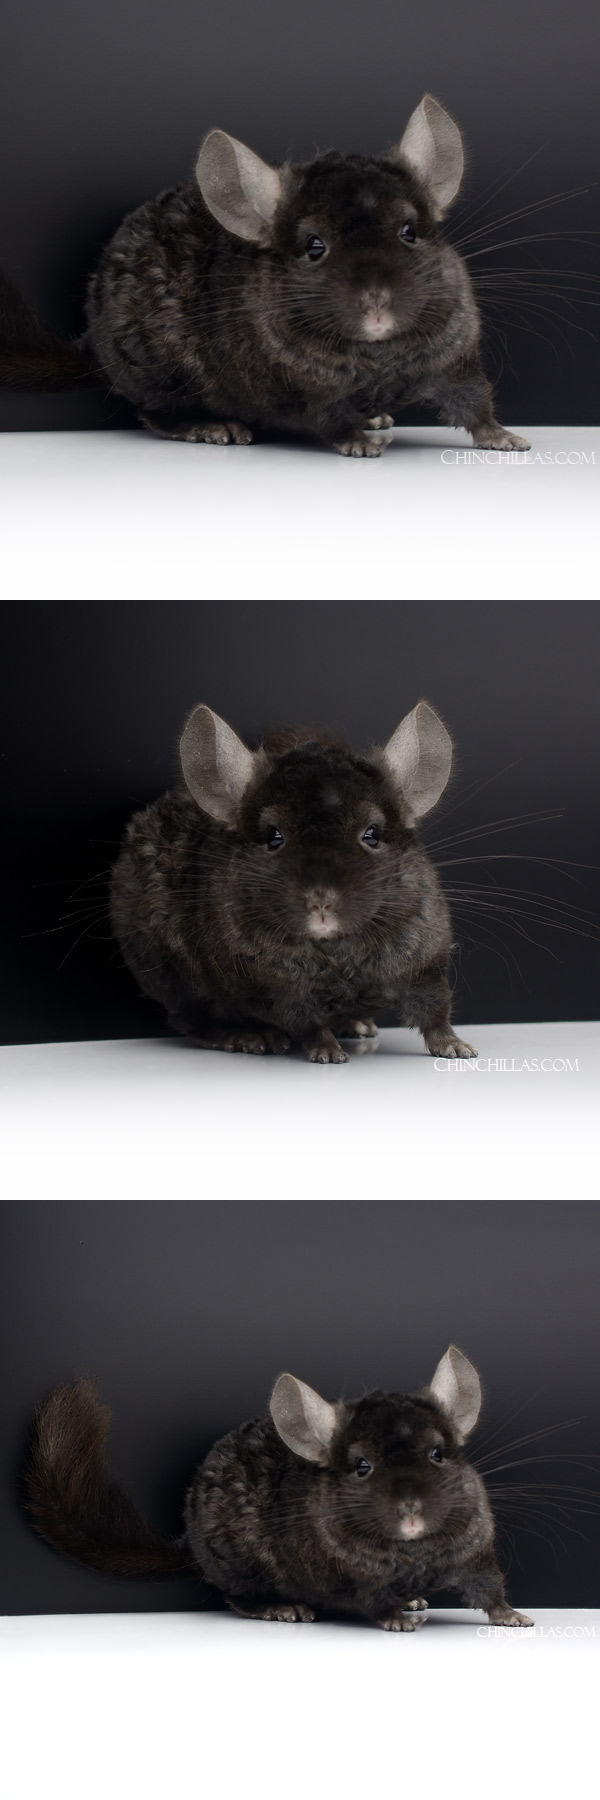 Chinchilla or related item offered for sale or export on Chinchillas.com - 23015 Ebony Locken Male Chinchilla